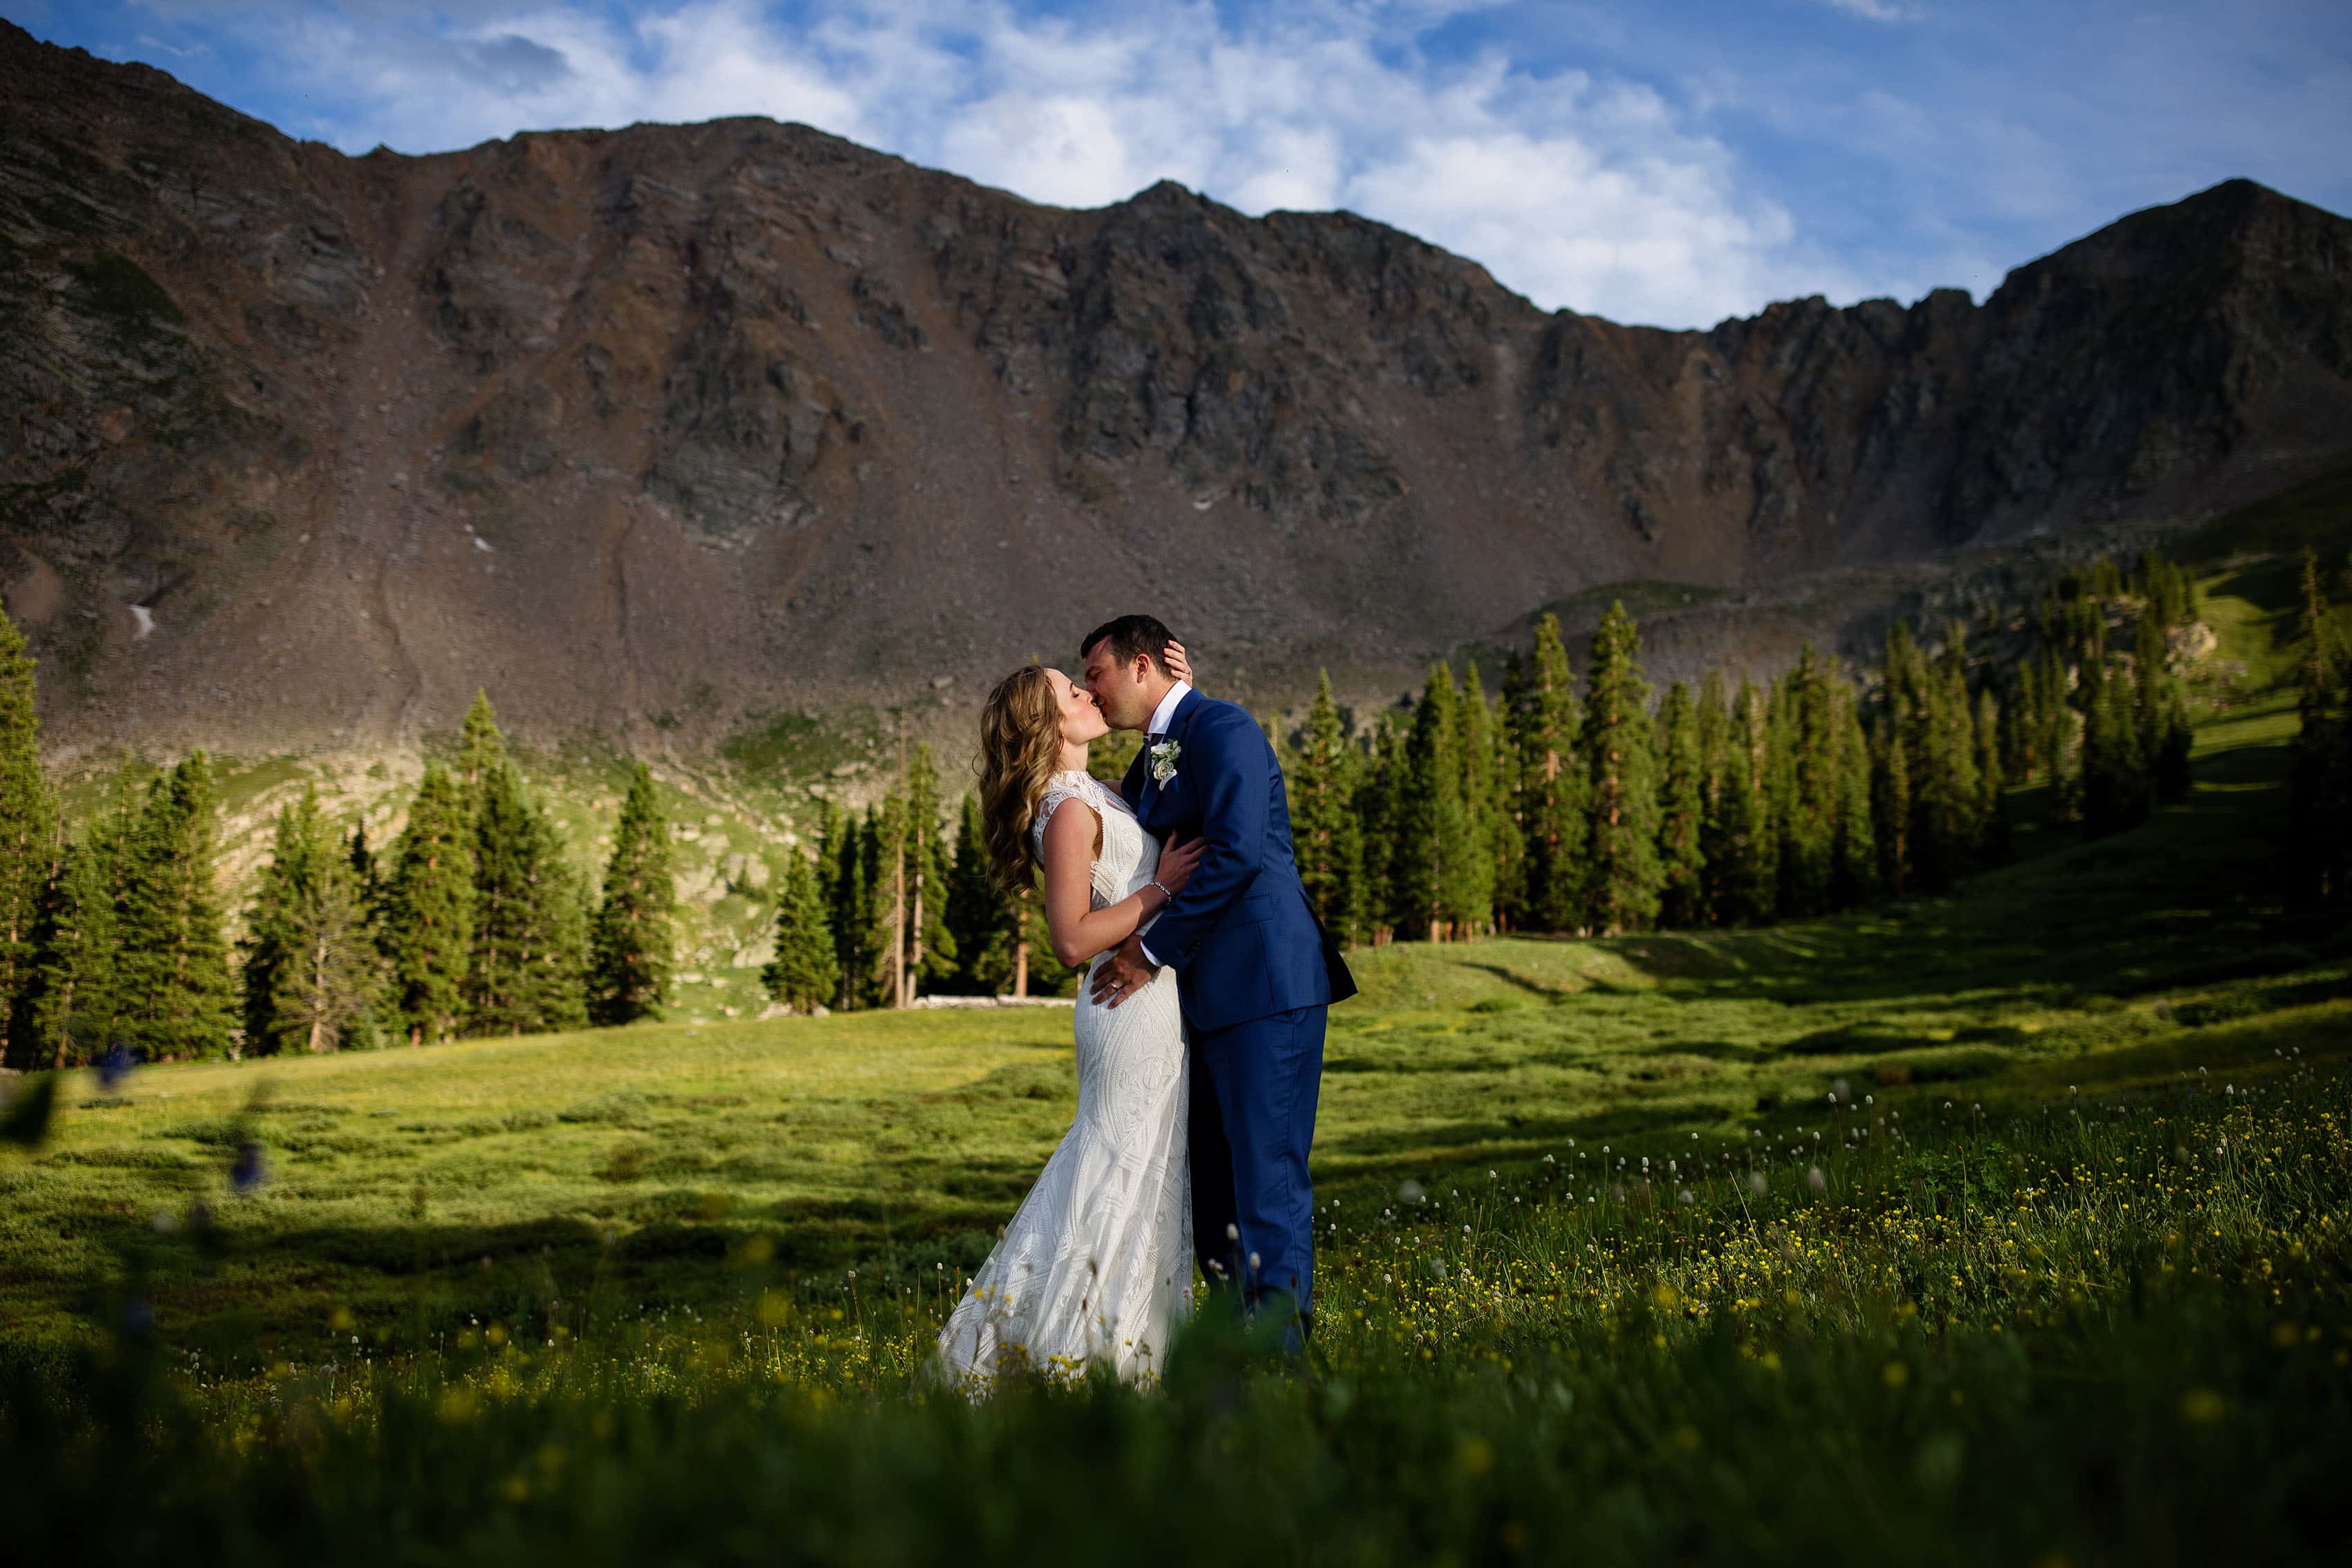 Keely and Steven share a kiss in the meadow near the East Wall at Arapahoe Basin